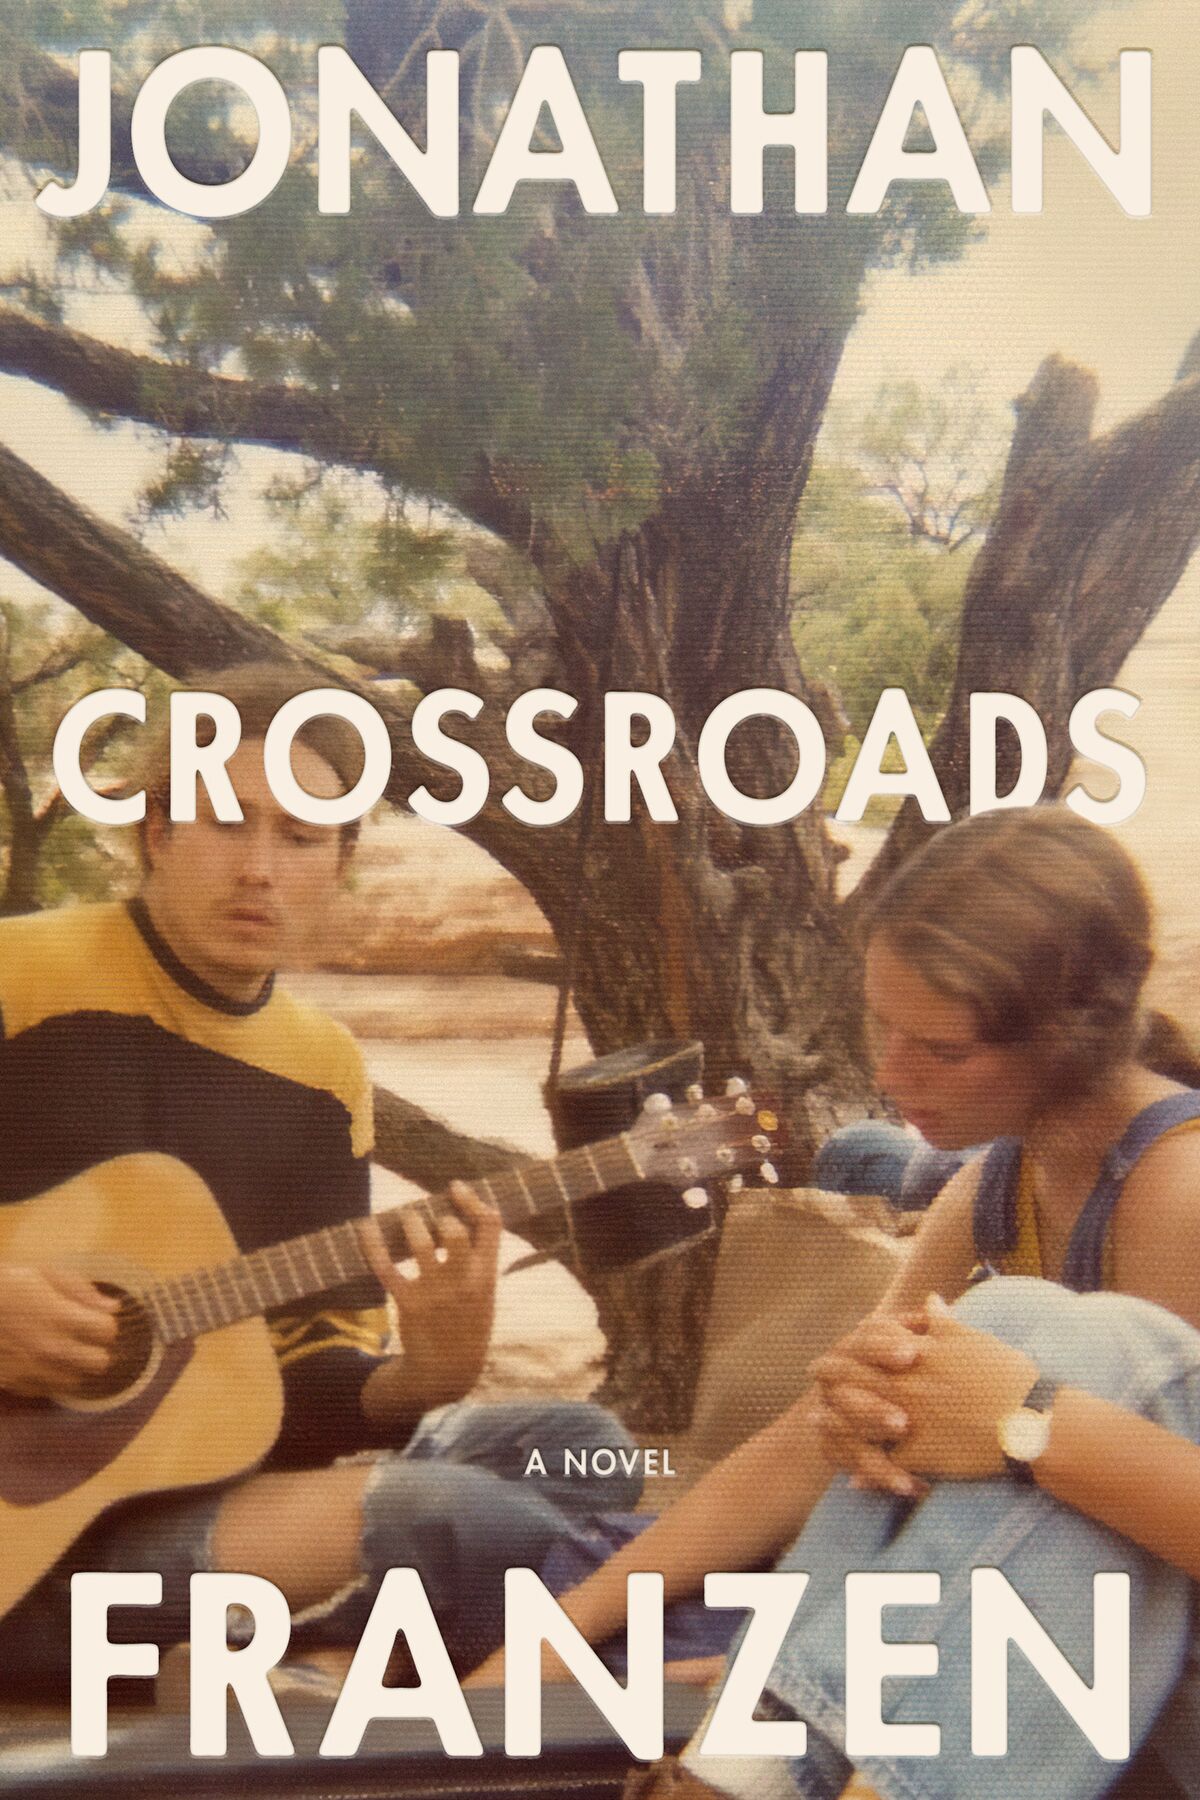 A man playing guitar and a woman are seated outside on the cover of "Crossroads," by Jonathan Franzen.